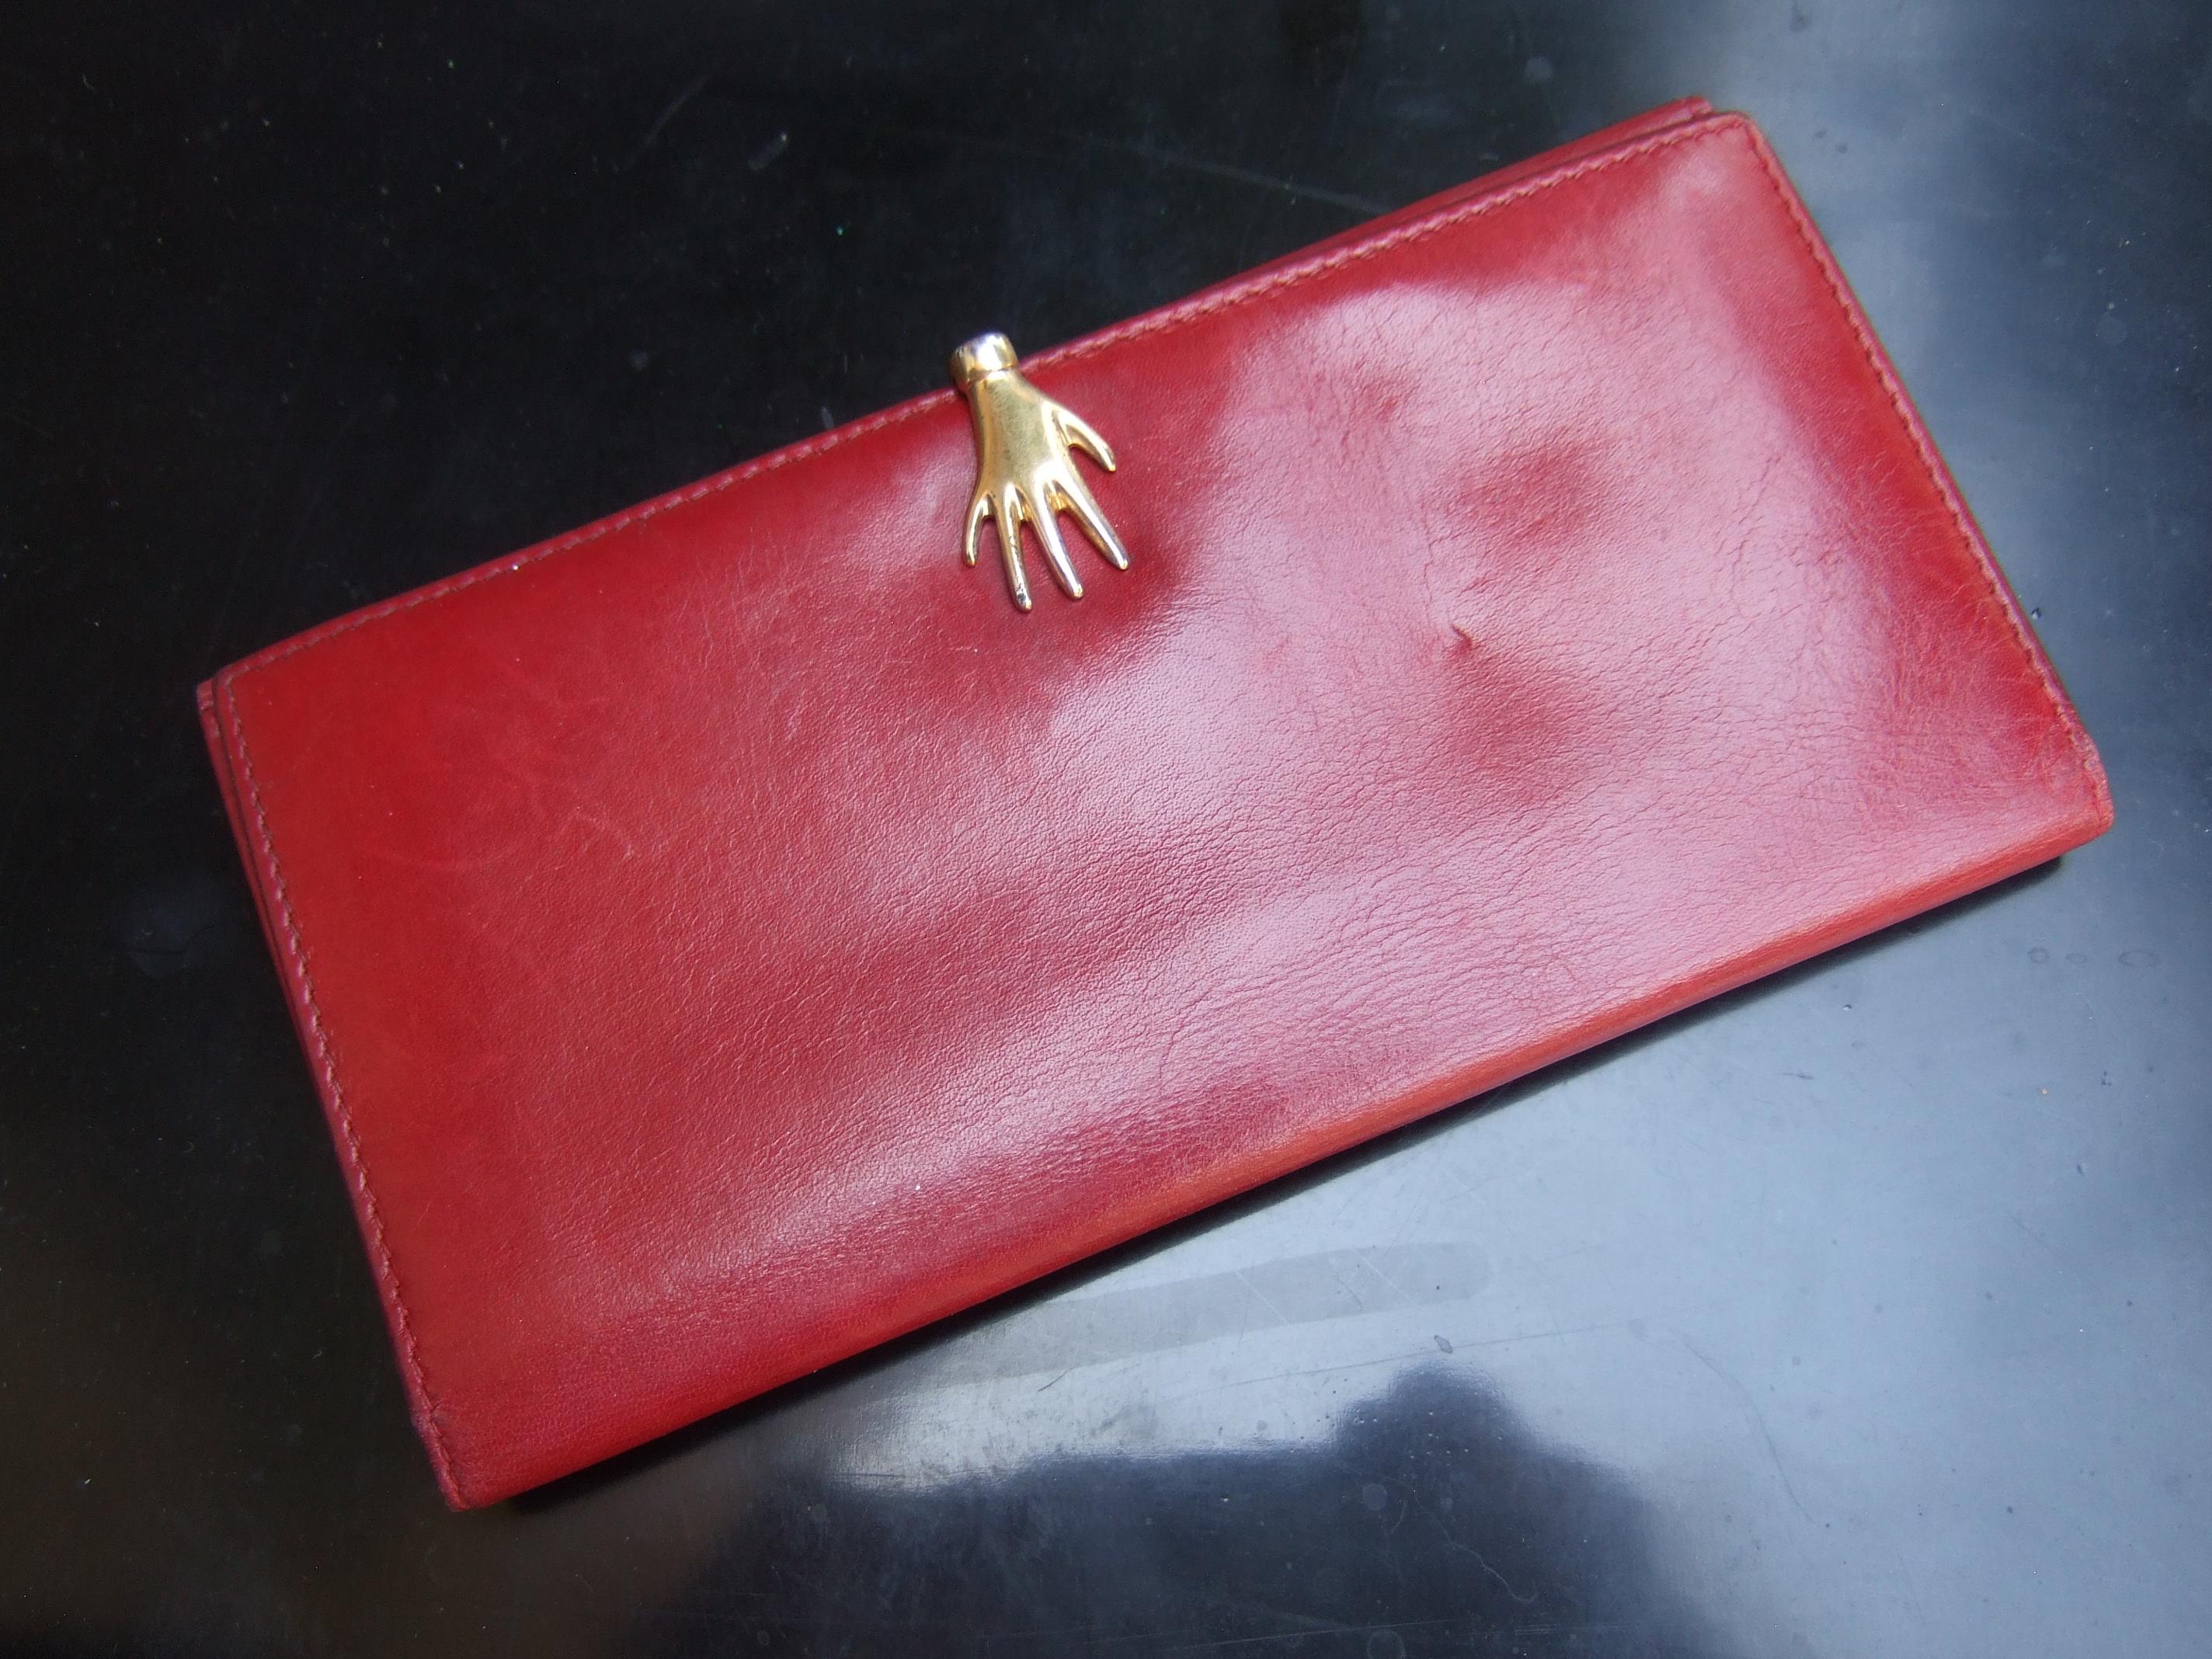 Gucci Italy Rare cherry red leather hand clasp wallet c 1980s
The stylish Italian wallet is designed with a unique gilt metal
hand that serves as the closure mechanism 

The interior is lined with smooth matching red leather designed
with six credit